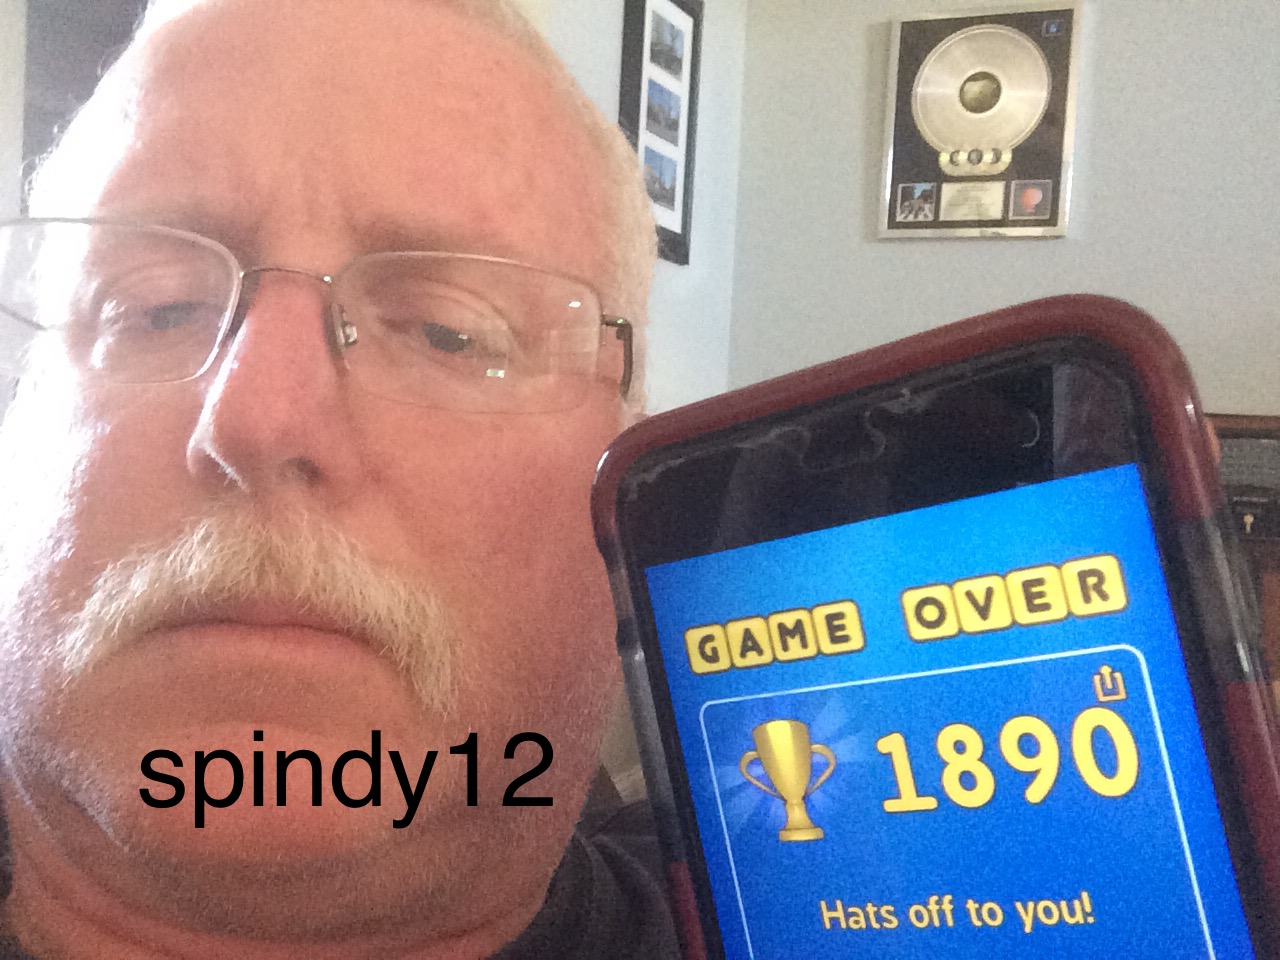 Spindy12: Word Shaker [5x5 board at a 5 minute limit] (iOS) 1,890 points on 2016-05-31 14:07:47